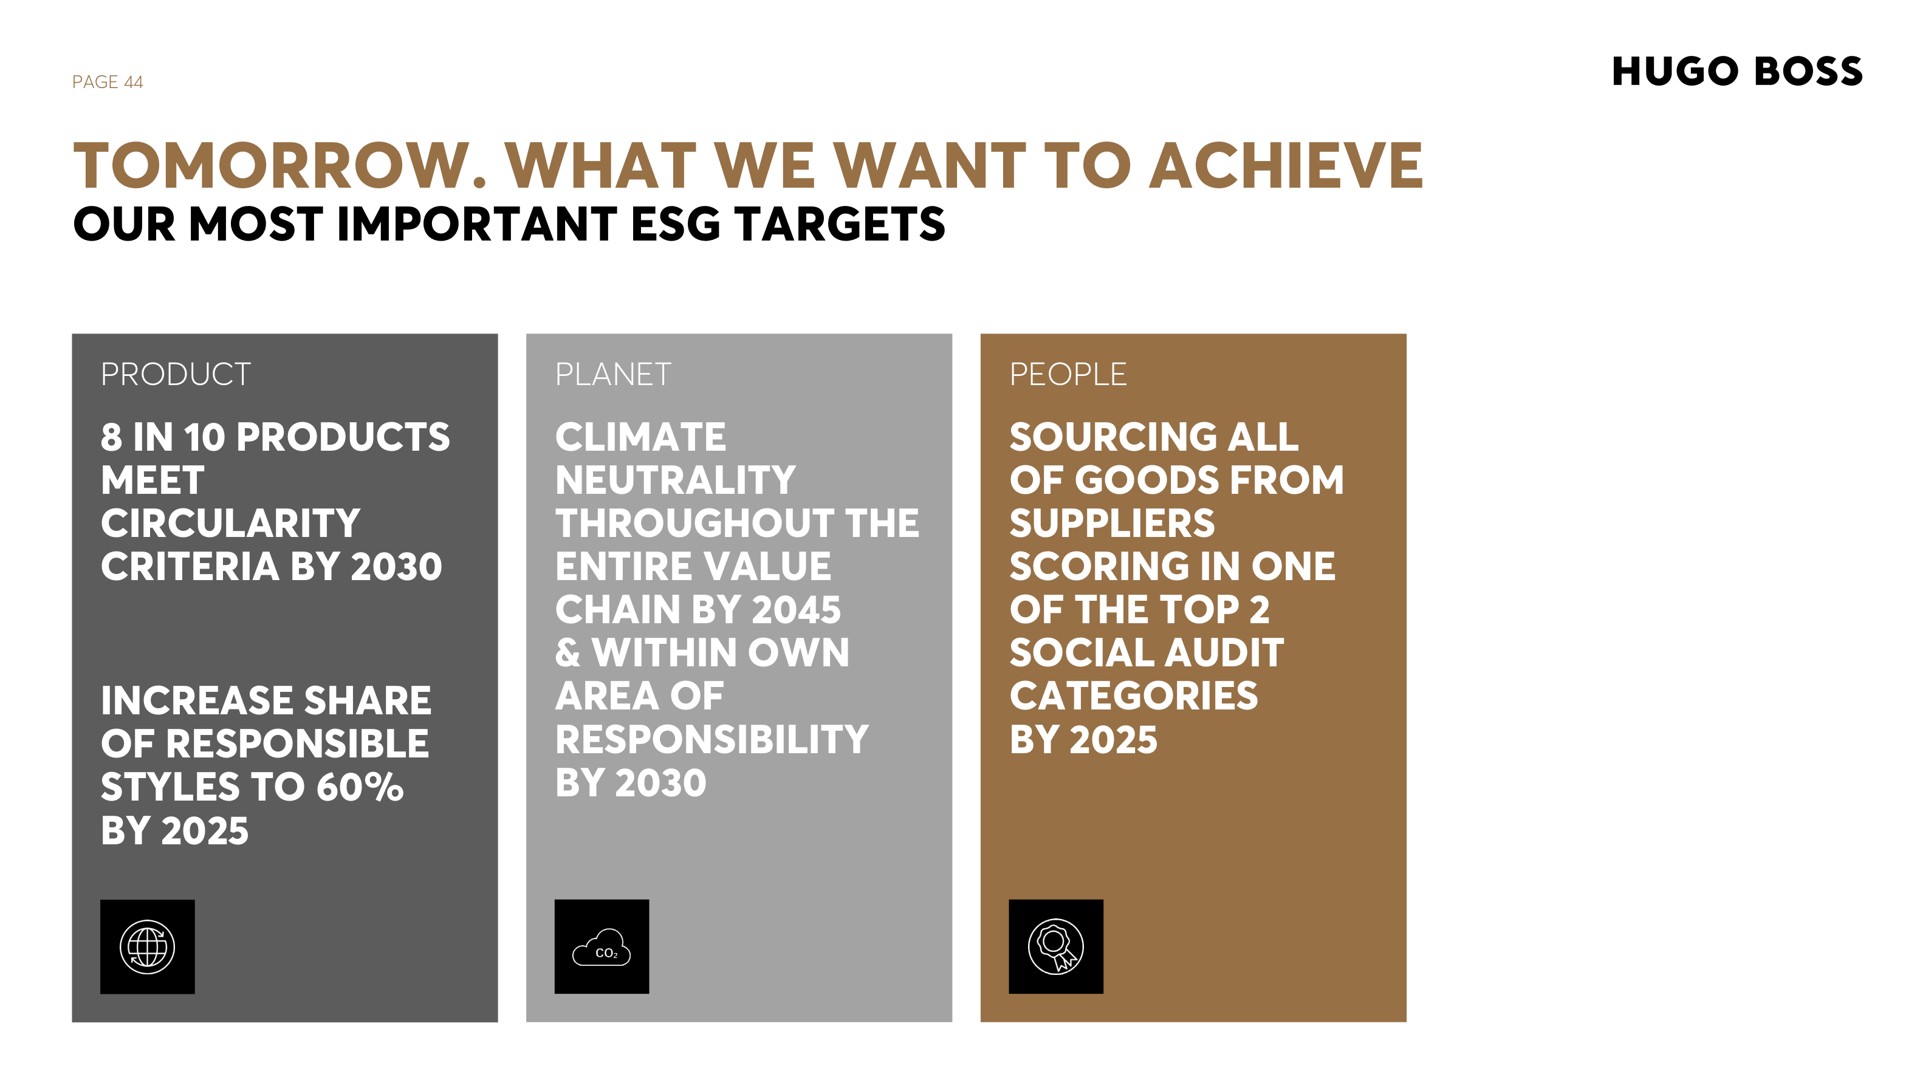 page tomorrow what we want to achieve our most important targets product planet people in products meet circularity criteria by increase share of responsible styles to by climate neutrality throughout the entire value chain by within own area of responsibility by sourcing all of goods from suppliers scoring in one of the top social audit categories by | Hugo Boss